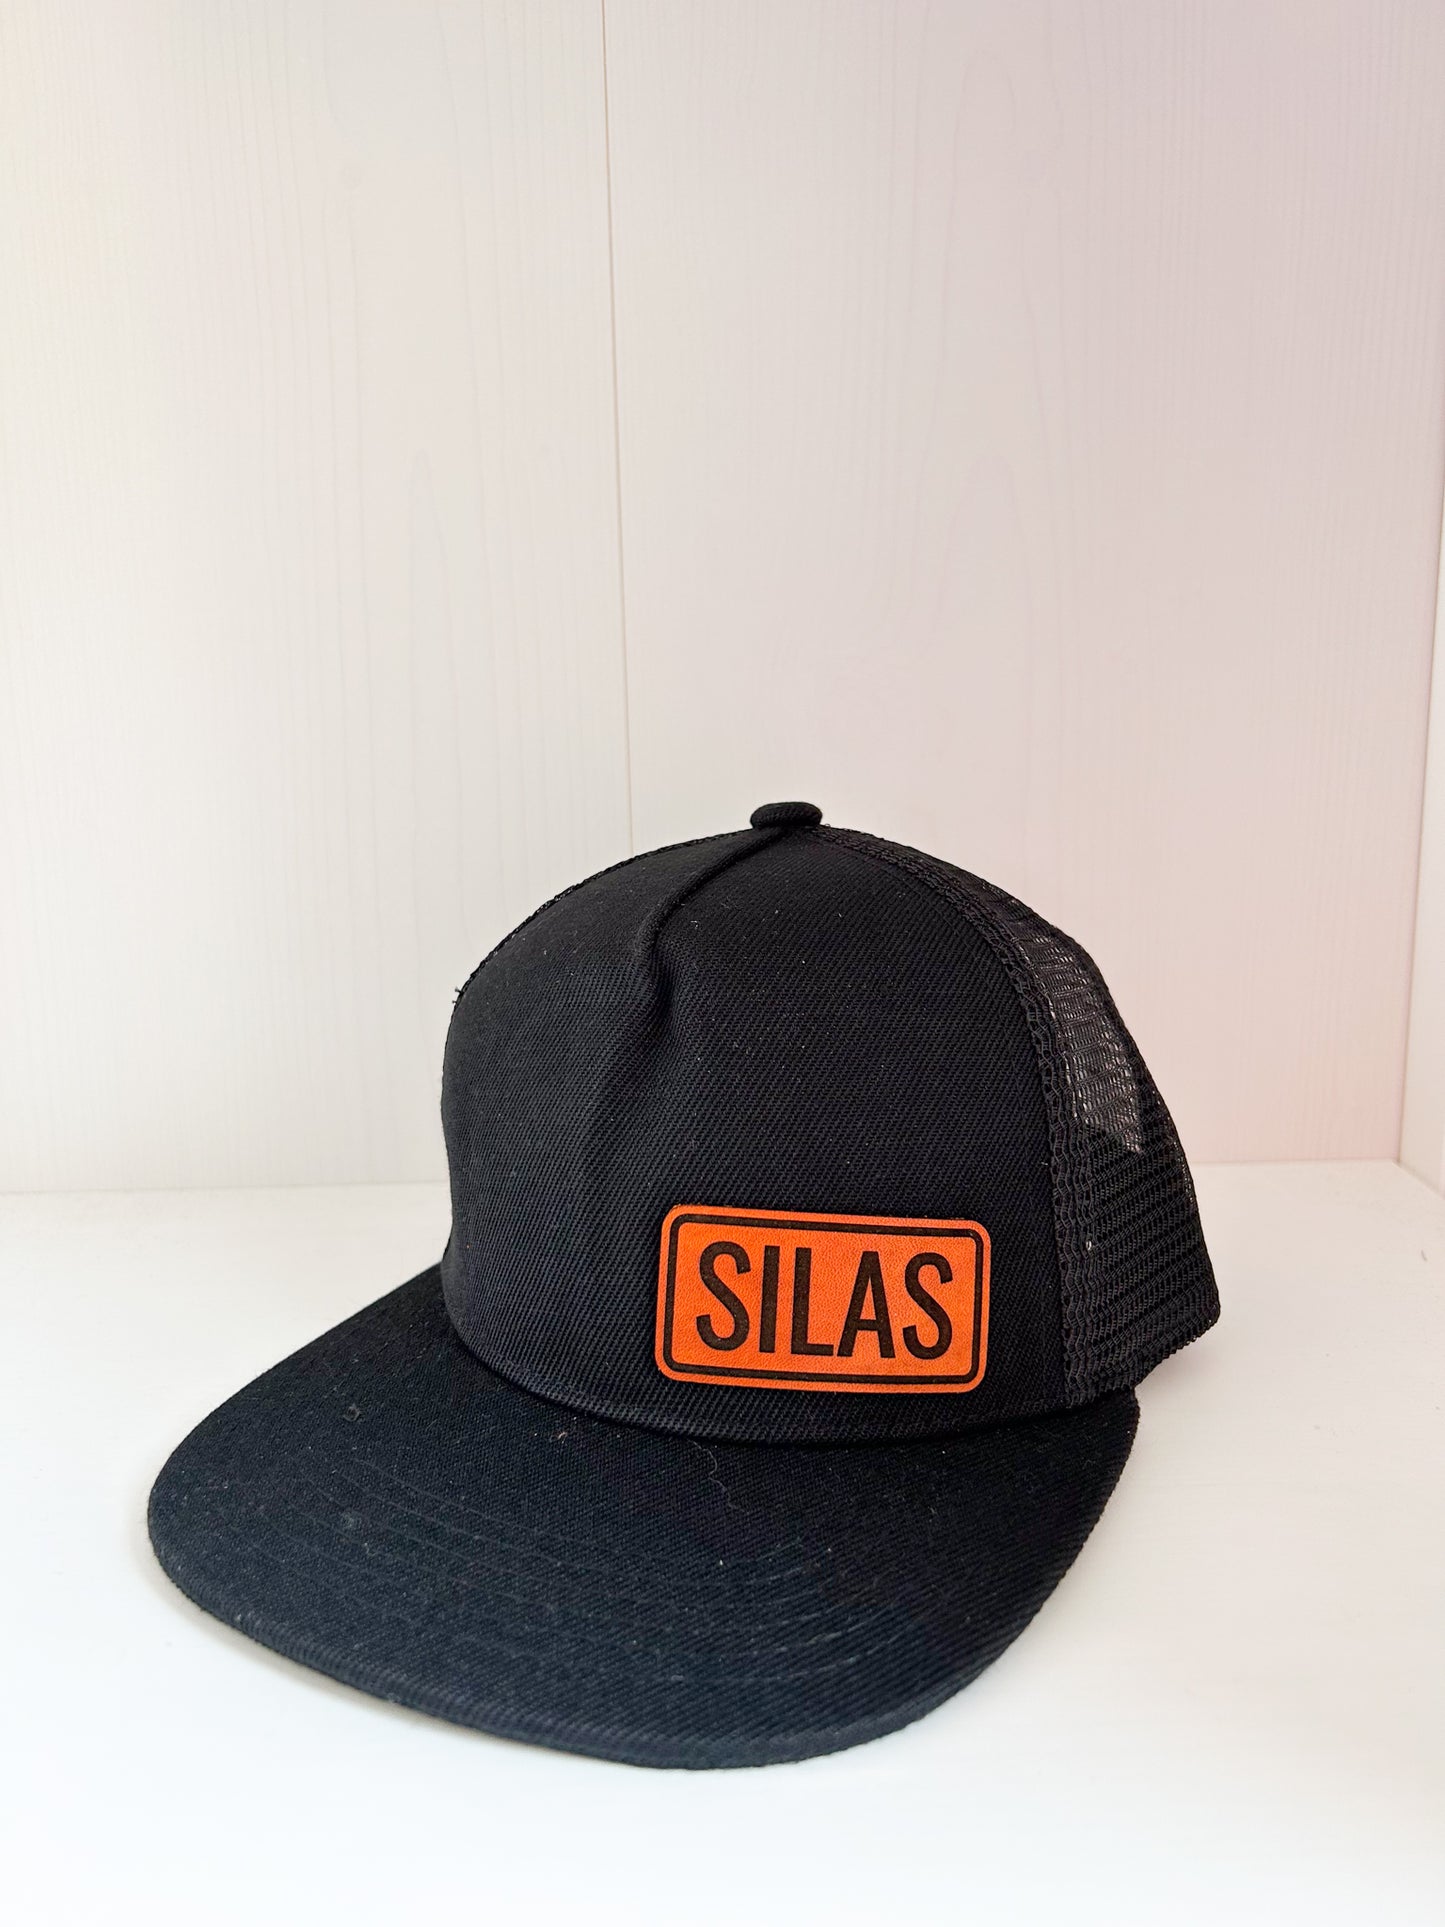 Personalized Leather Patch with Kids Name on Black Trucker Hat